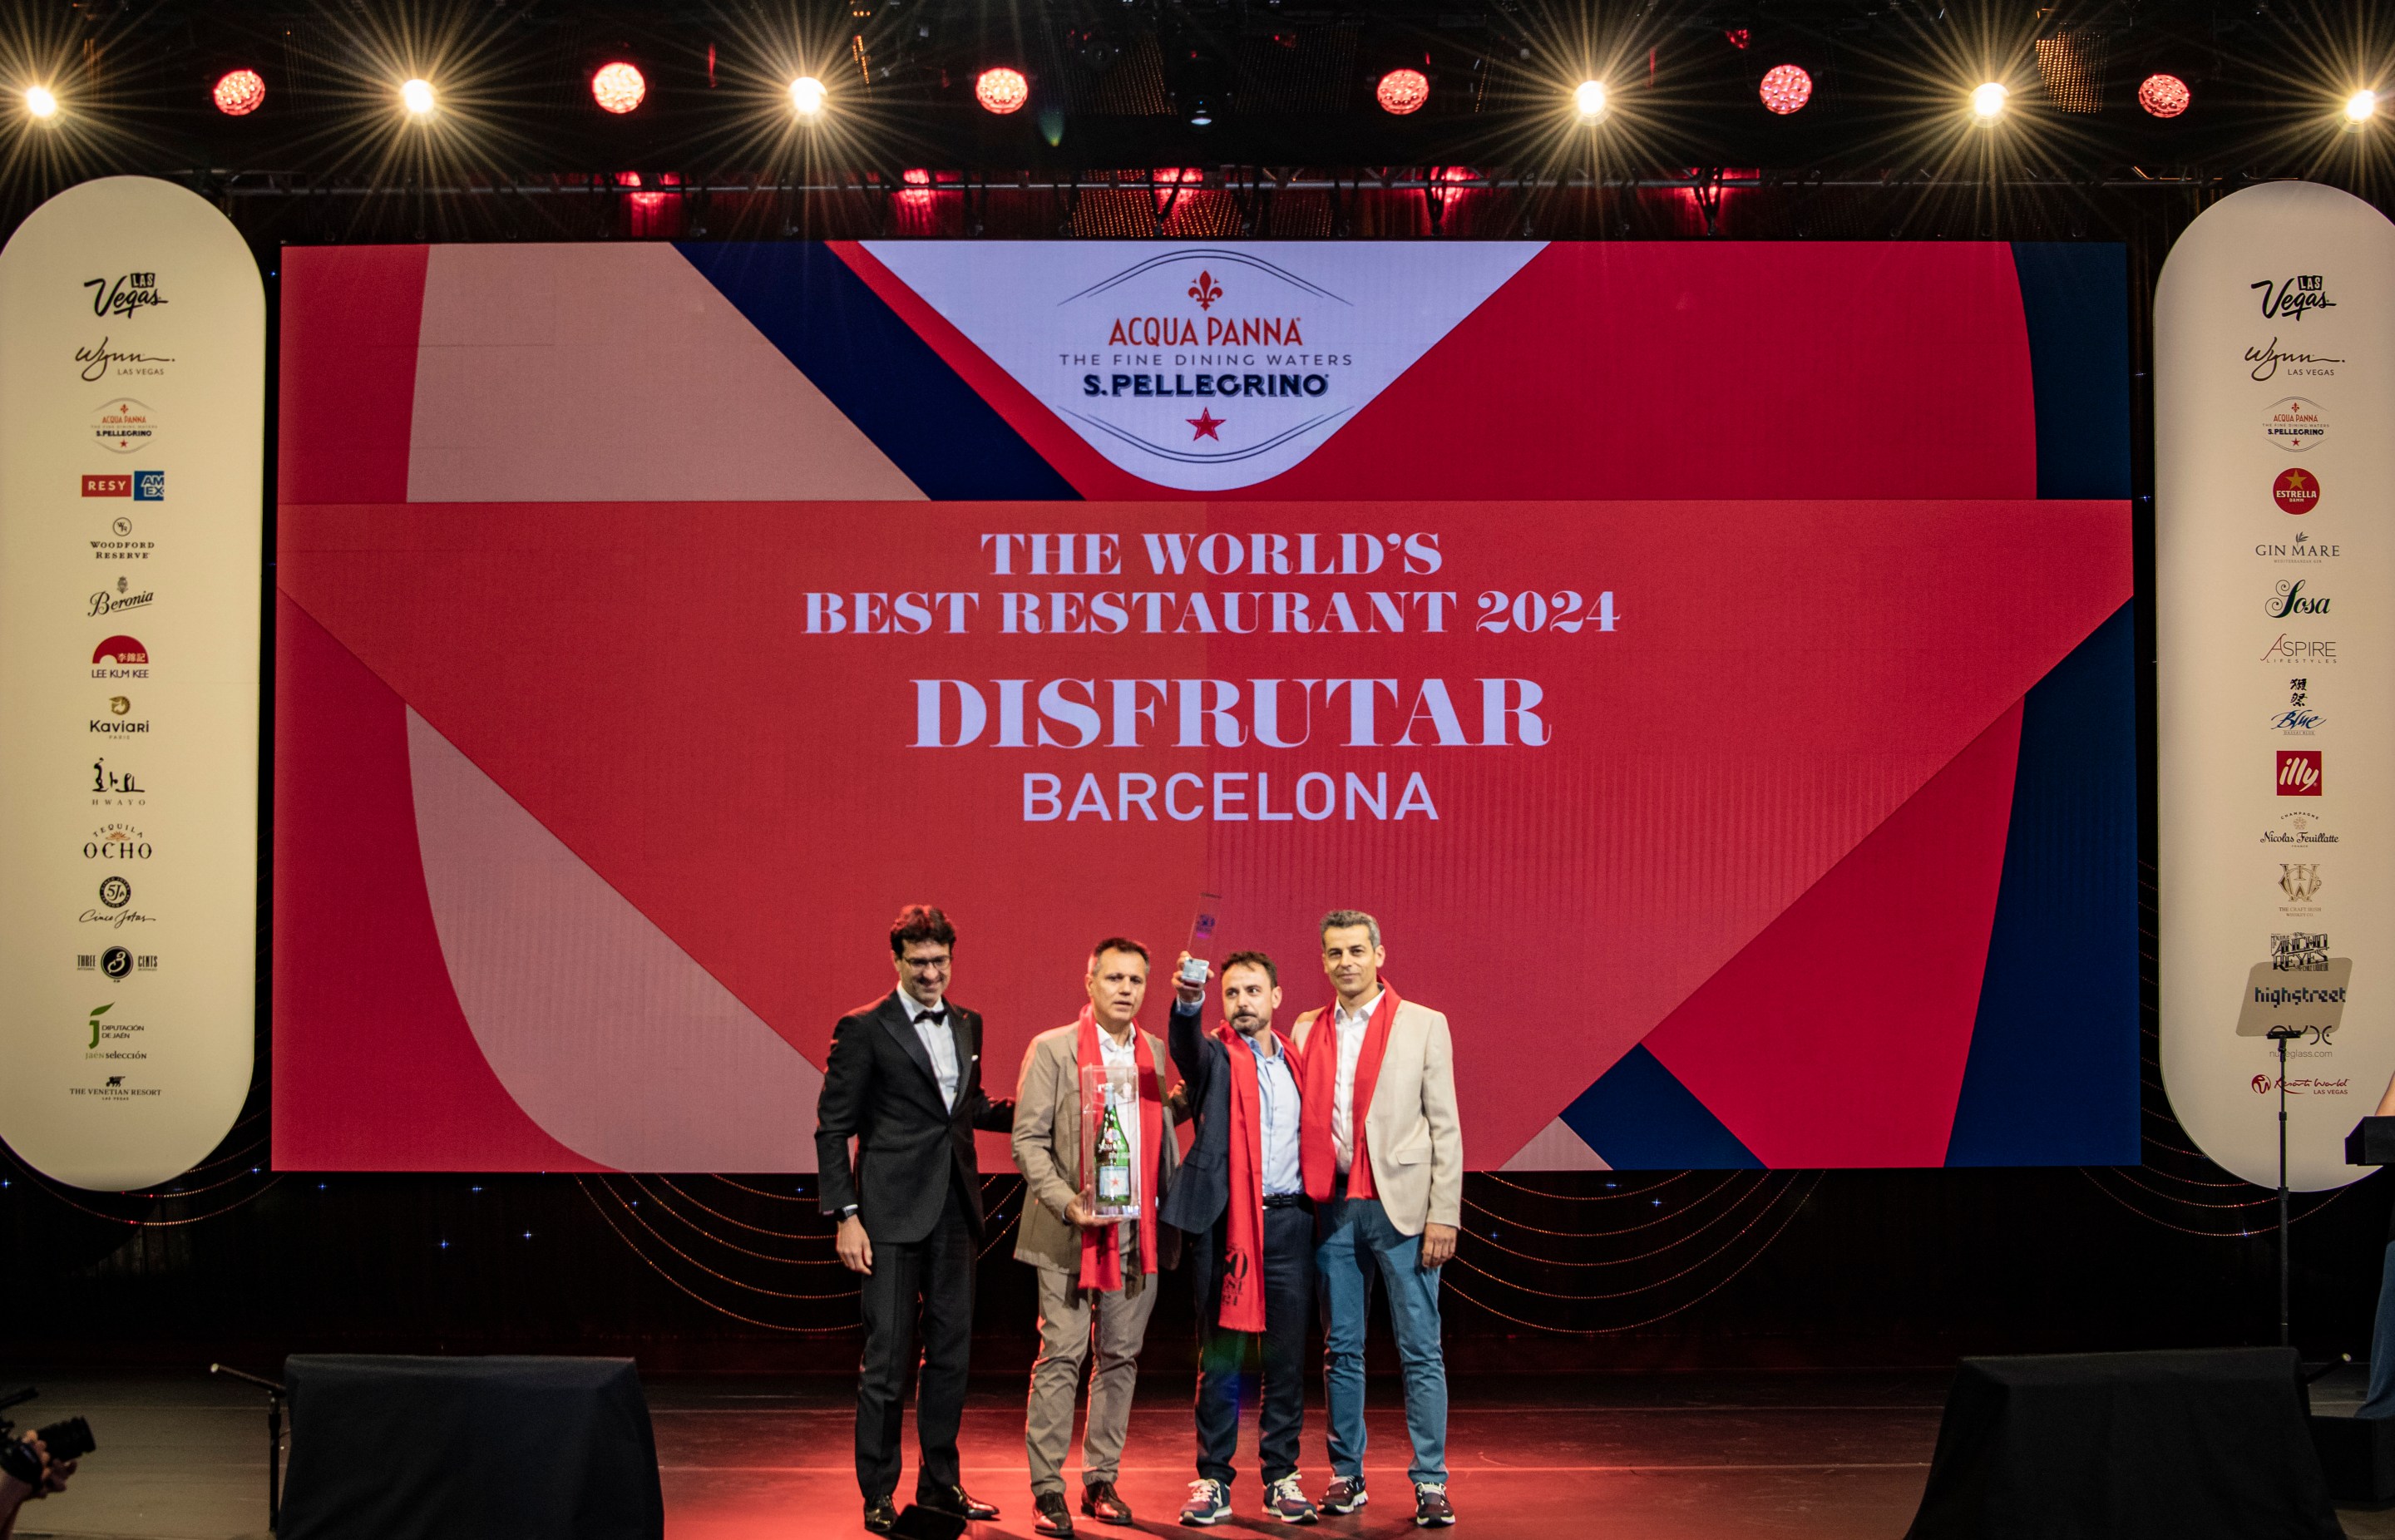 Barcelona’s Disfrutar, led by chef trio of Oriol Castro, Eduard Xatruch and Mateu Casañas, has been named The World’s Best Restaurant 2024.